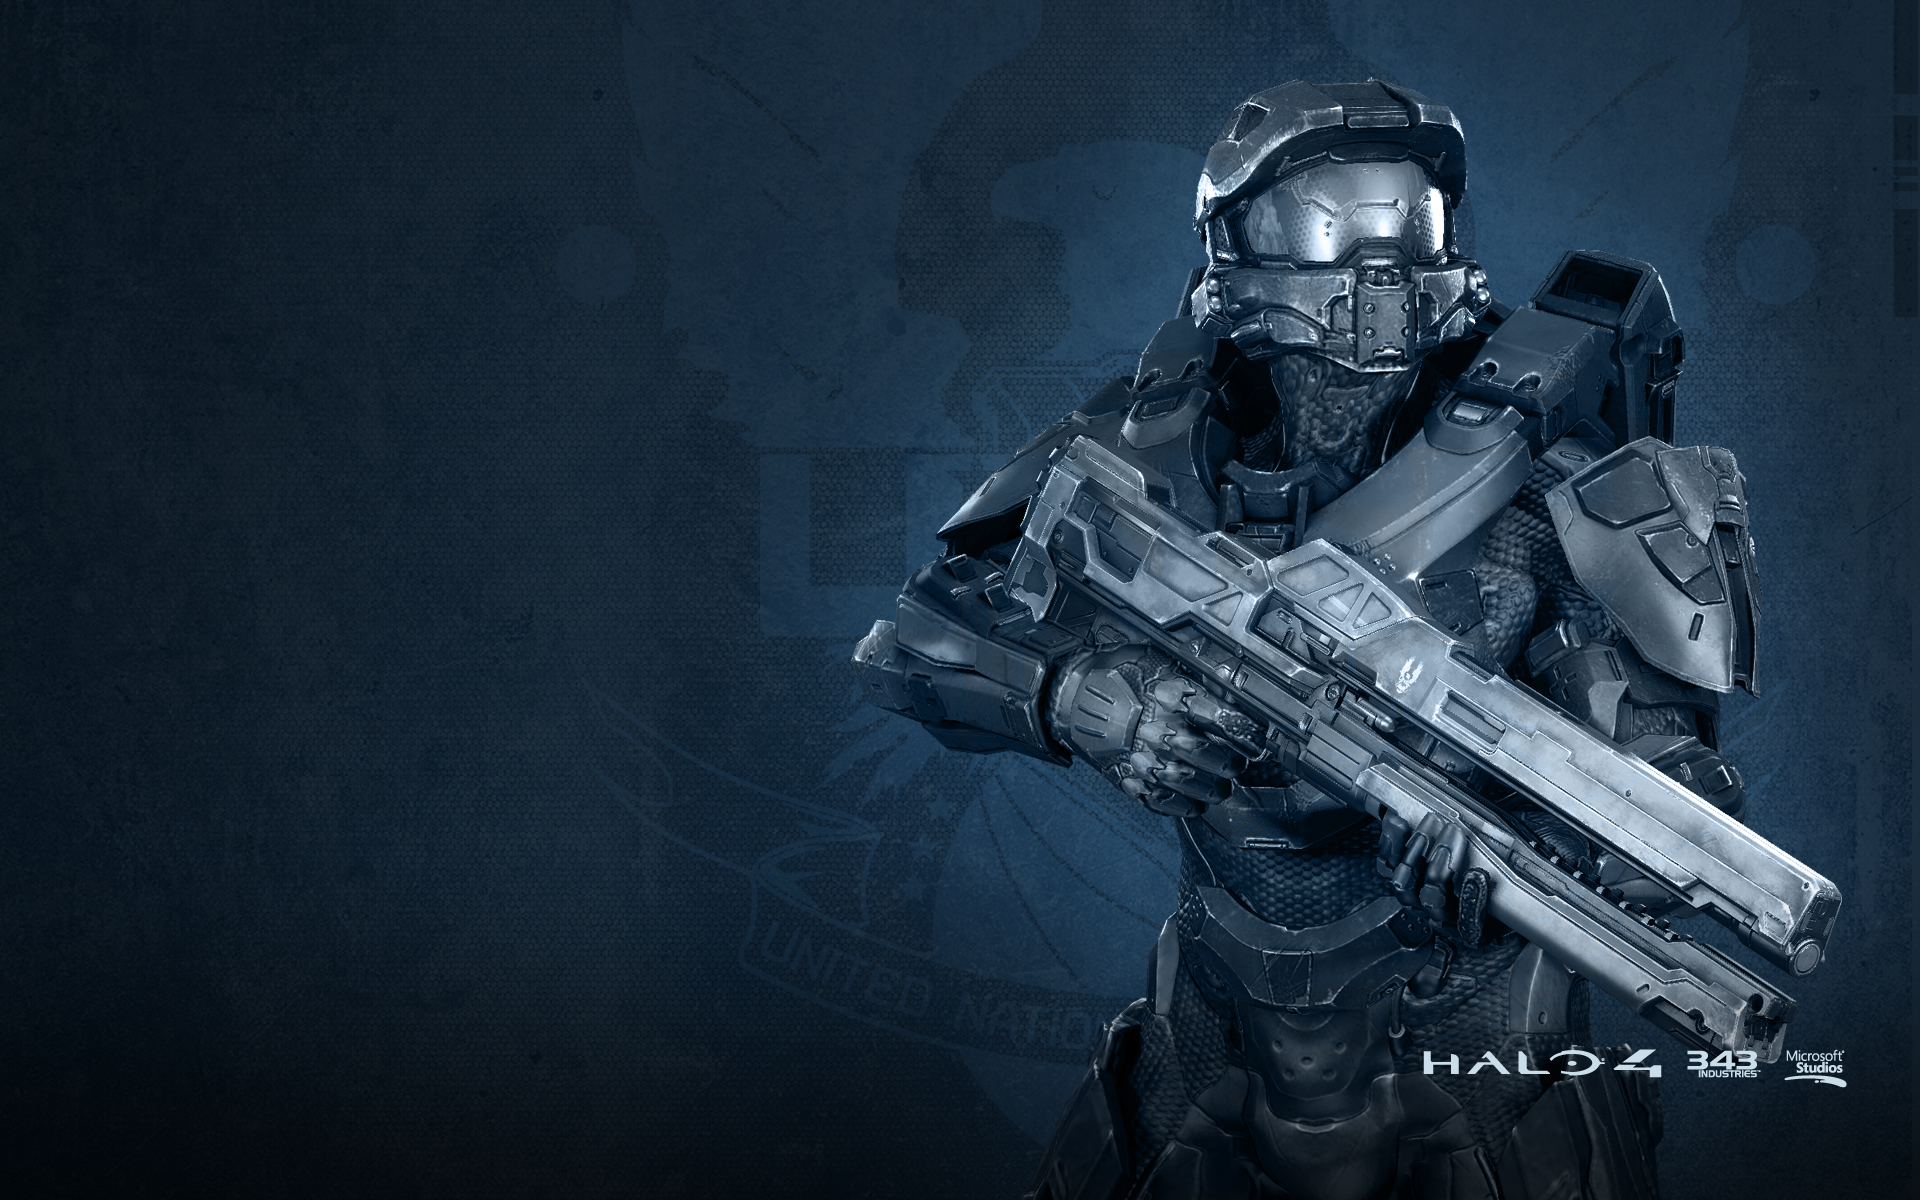 Halo 4 wallpapers (3)